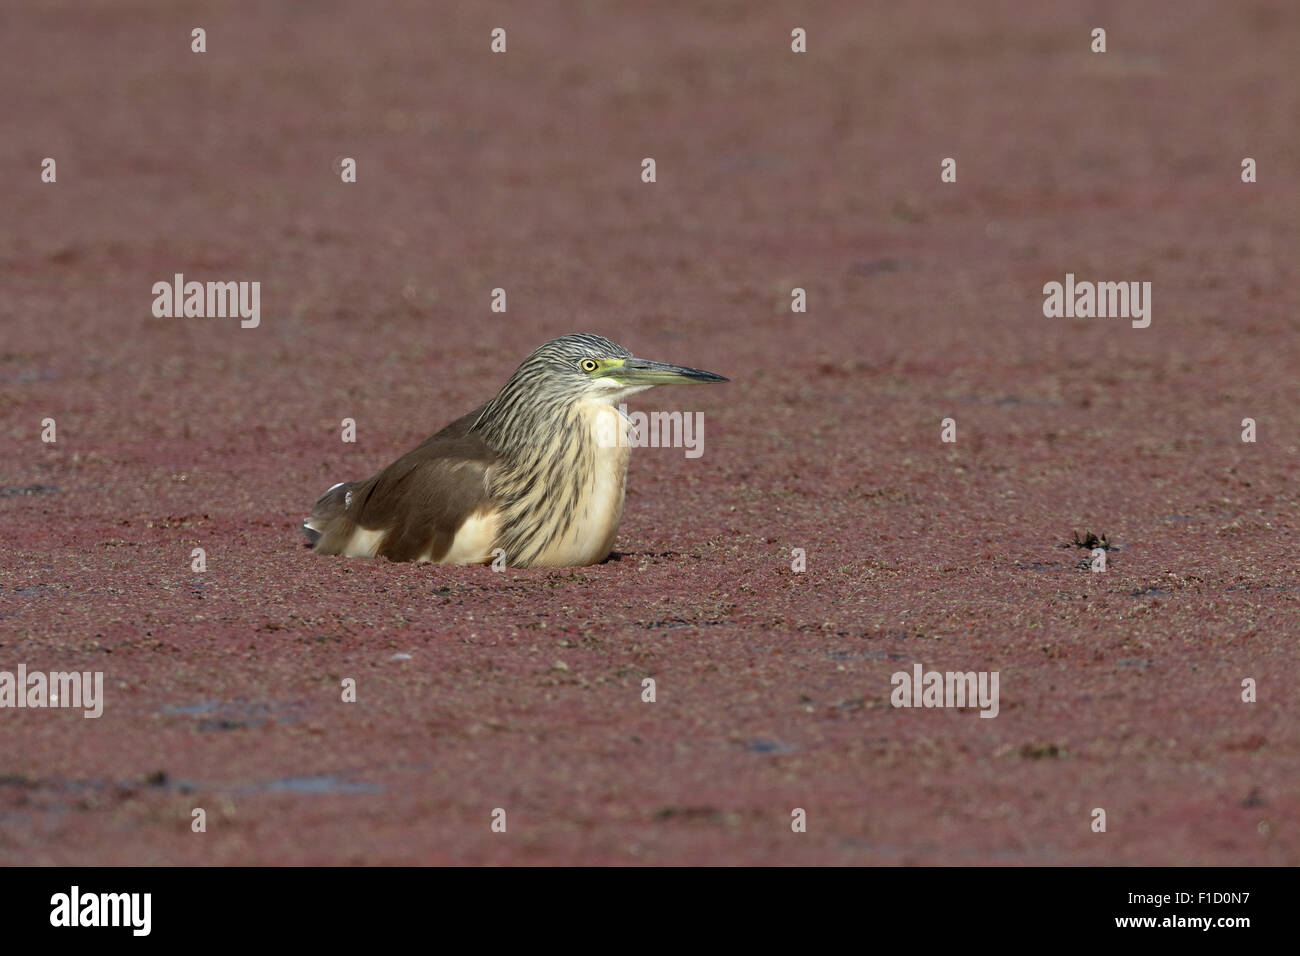 Squacco heron, Ardeola ralloides, single bird in water, South Africa, August 2015 Stock Photo